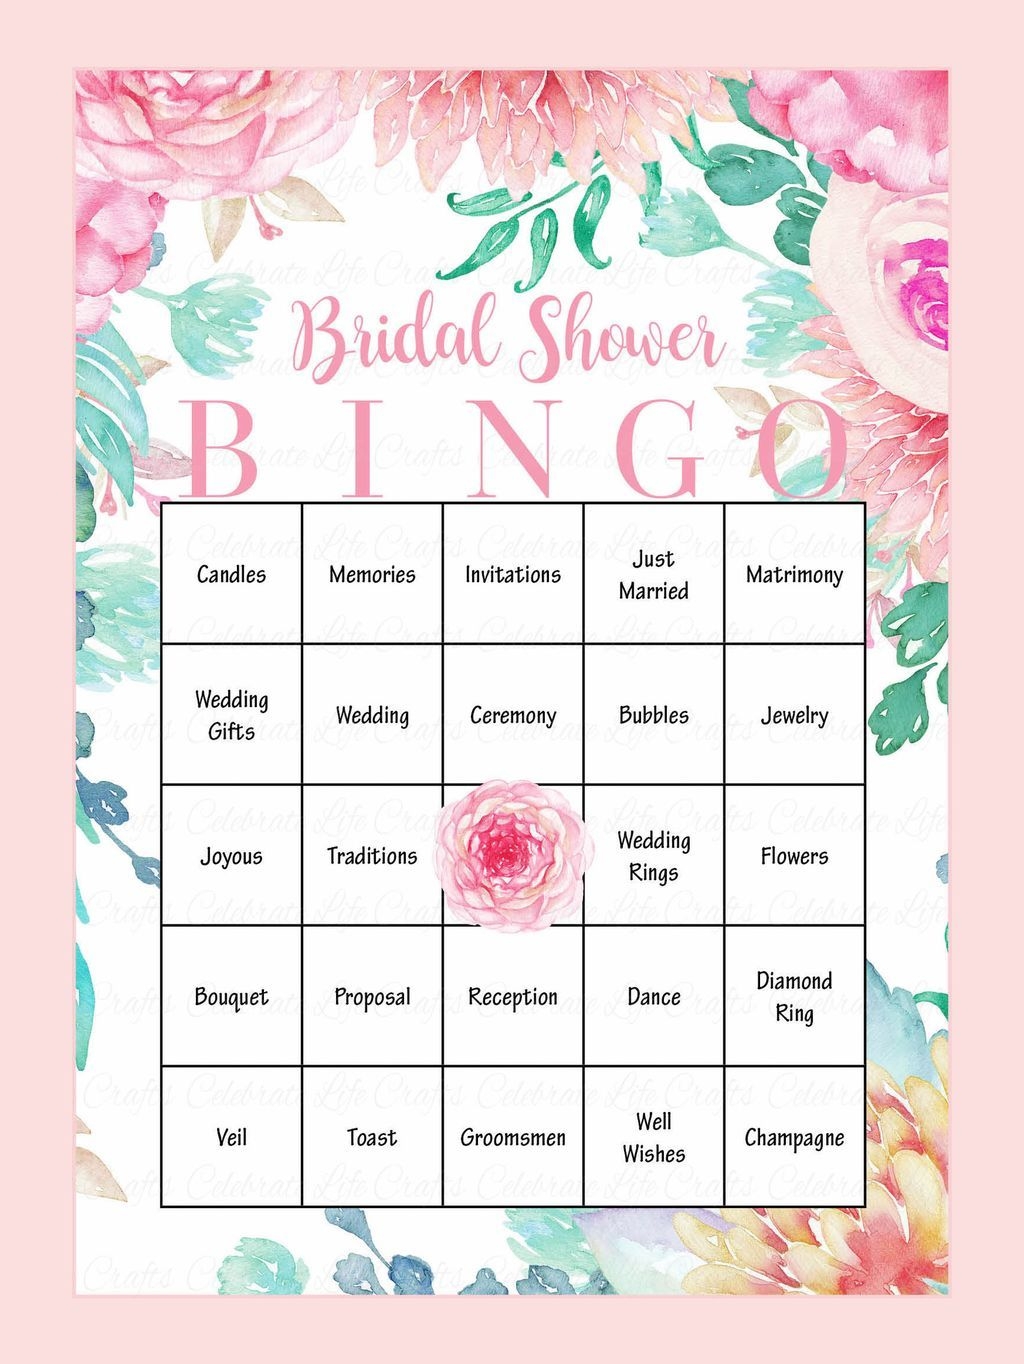 11 Printable Wedding Shower Games That Are Seriously So Much Fun Bridal Shower Bingo Bridal Shower Printables Printable Bridal Shower Bingo - Free Printable Bridal Shower Blank Bingo Games